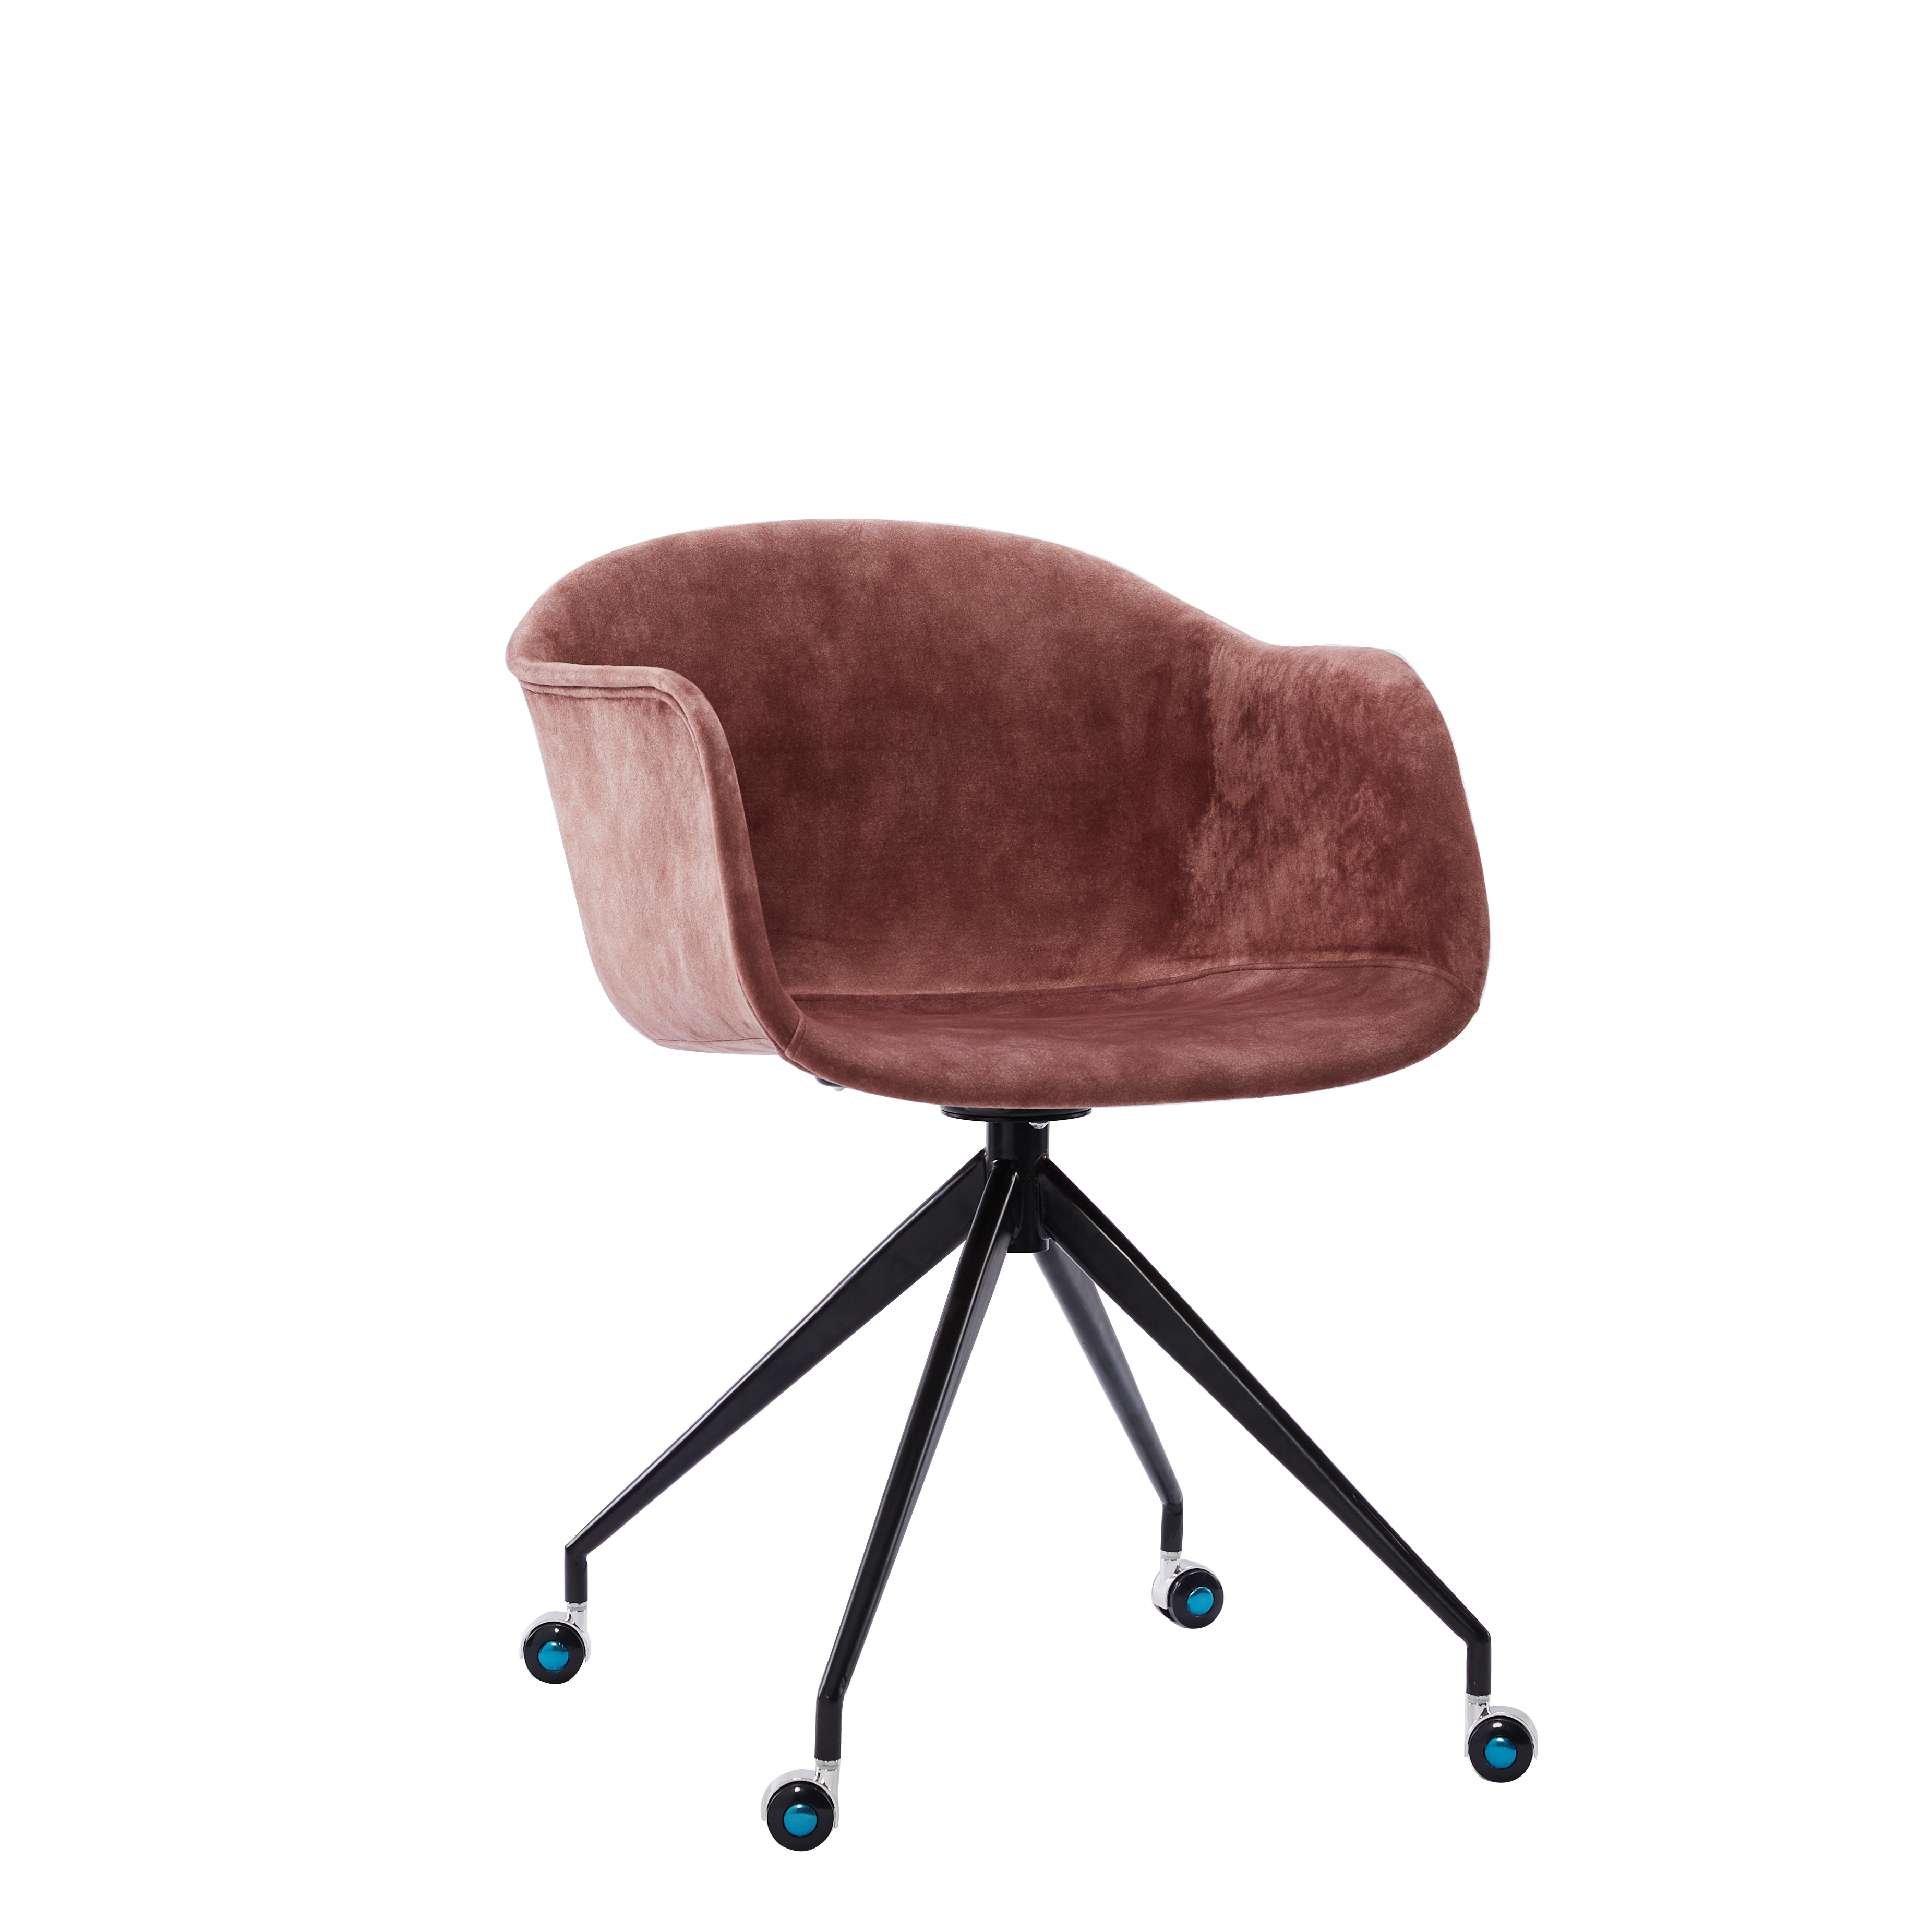 contemporary comfy fabric covered swivel chair with wheels